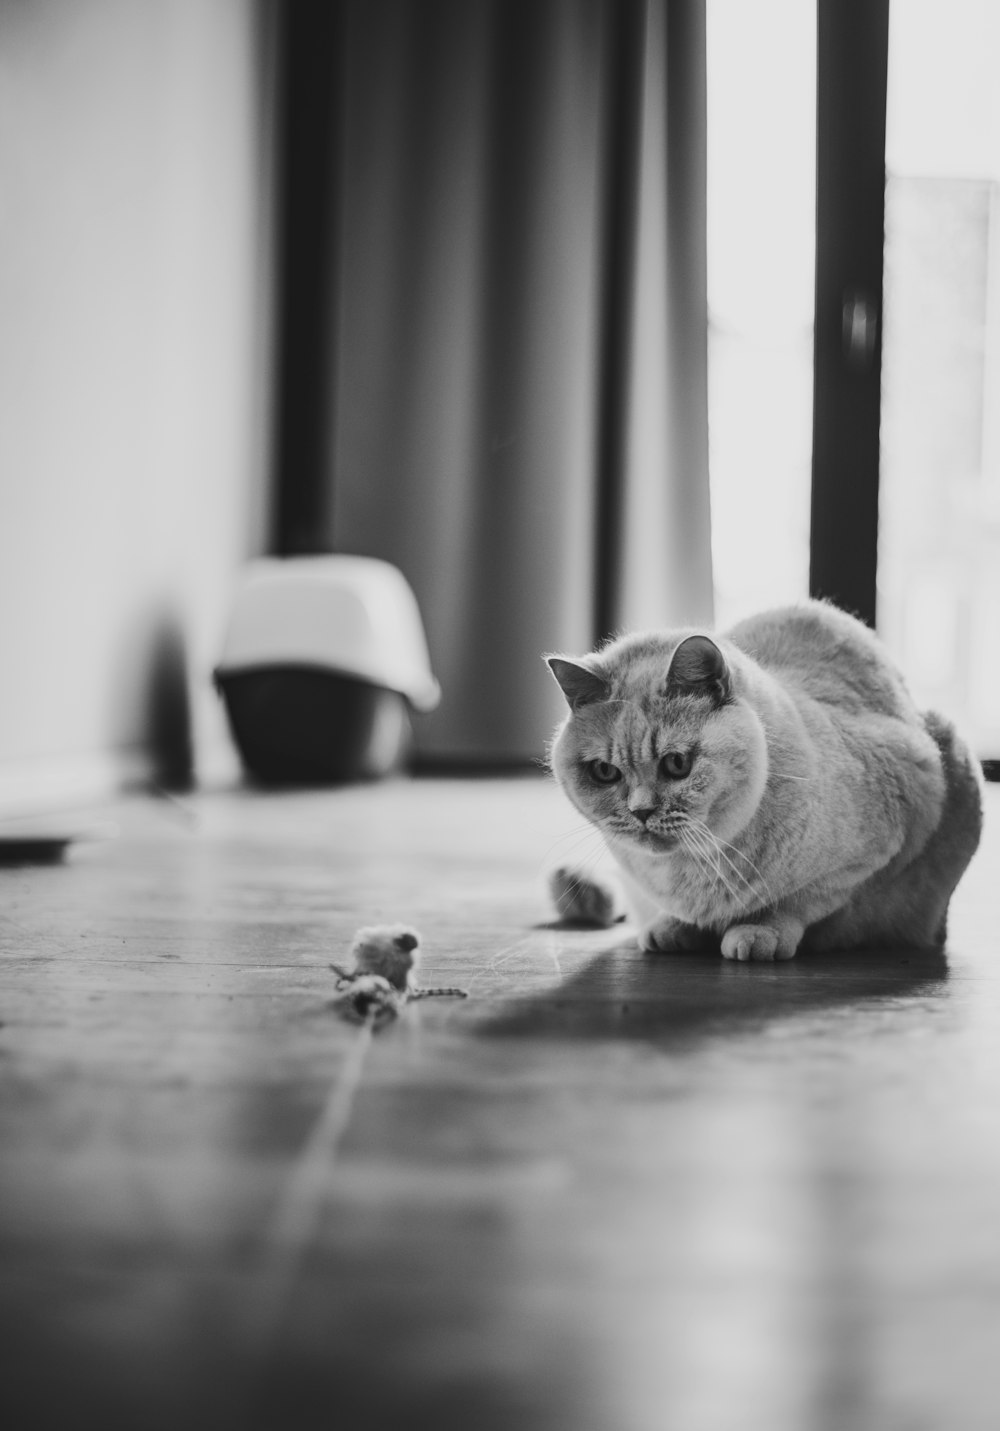 grayscale photography of cat inside room